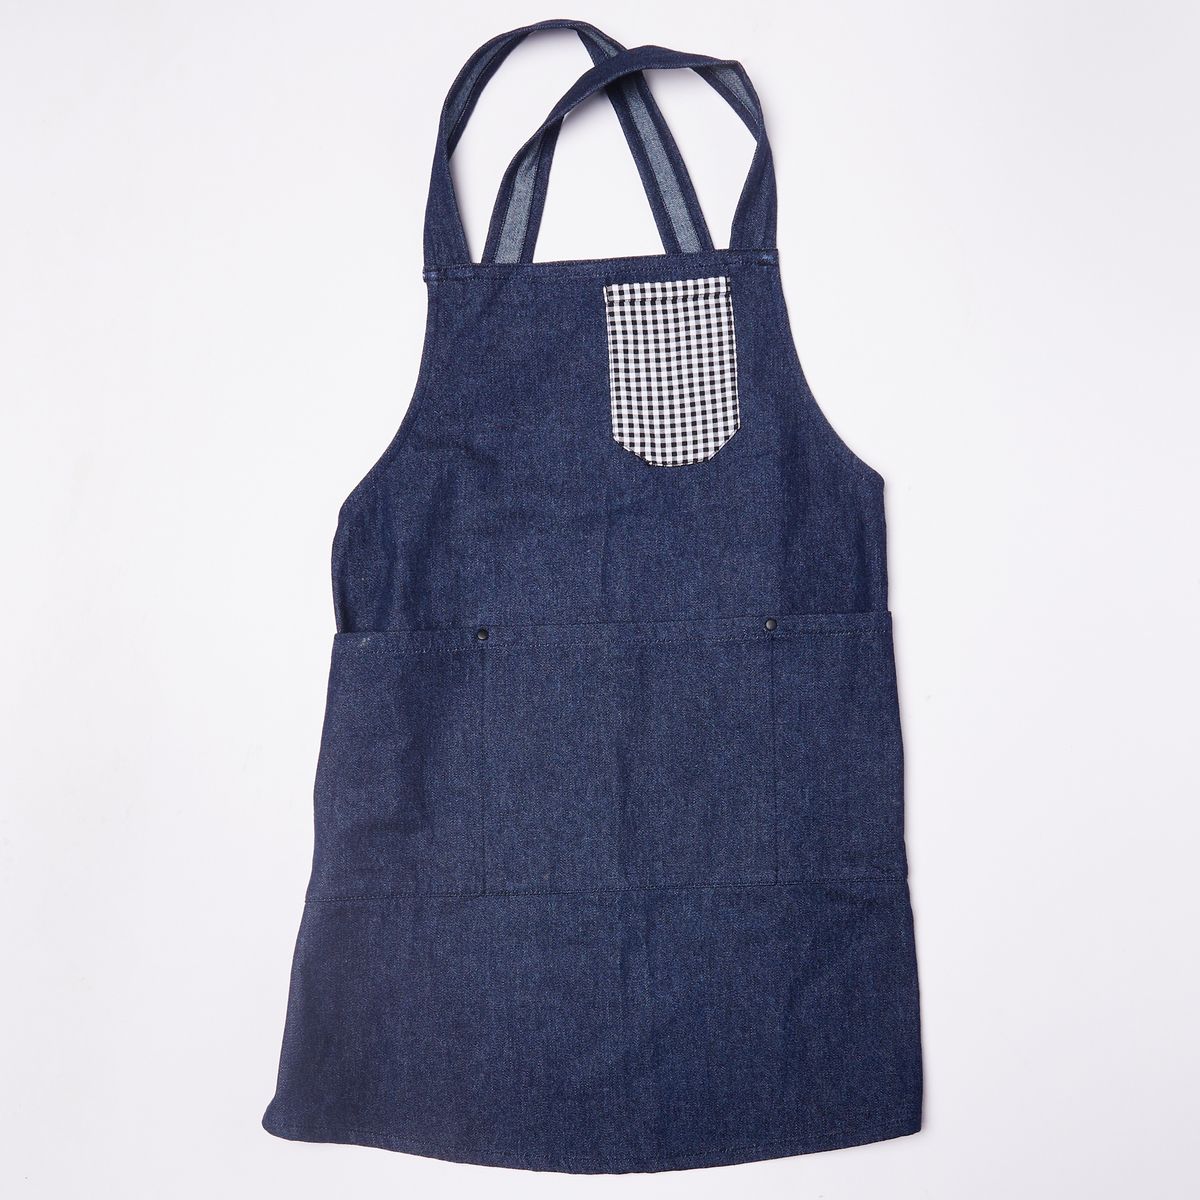 Denim blue kids criss cross apron with a little pocket on the top right in a gingham fabric